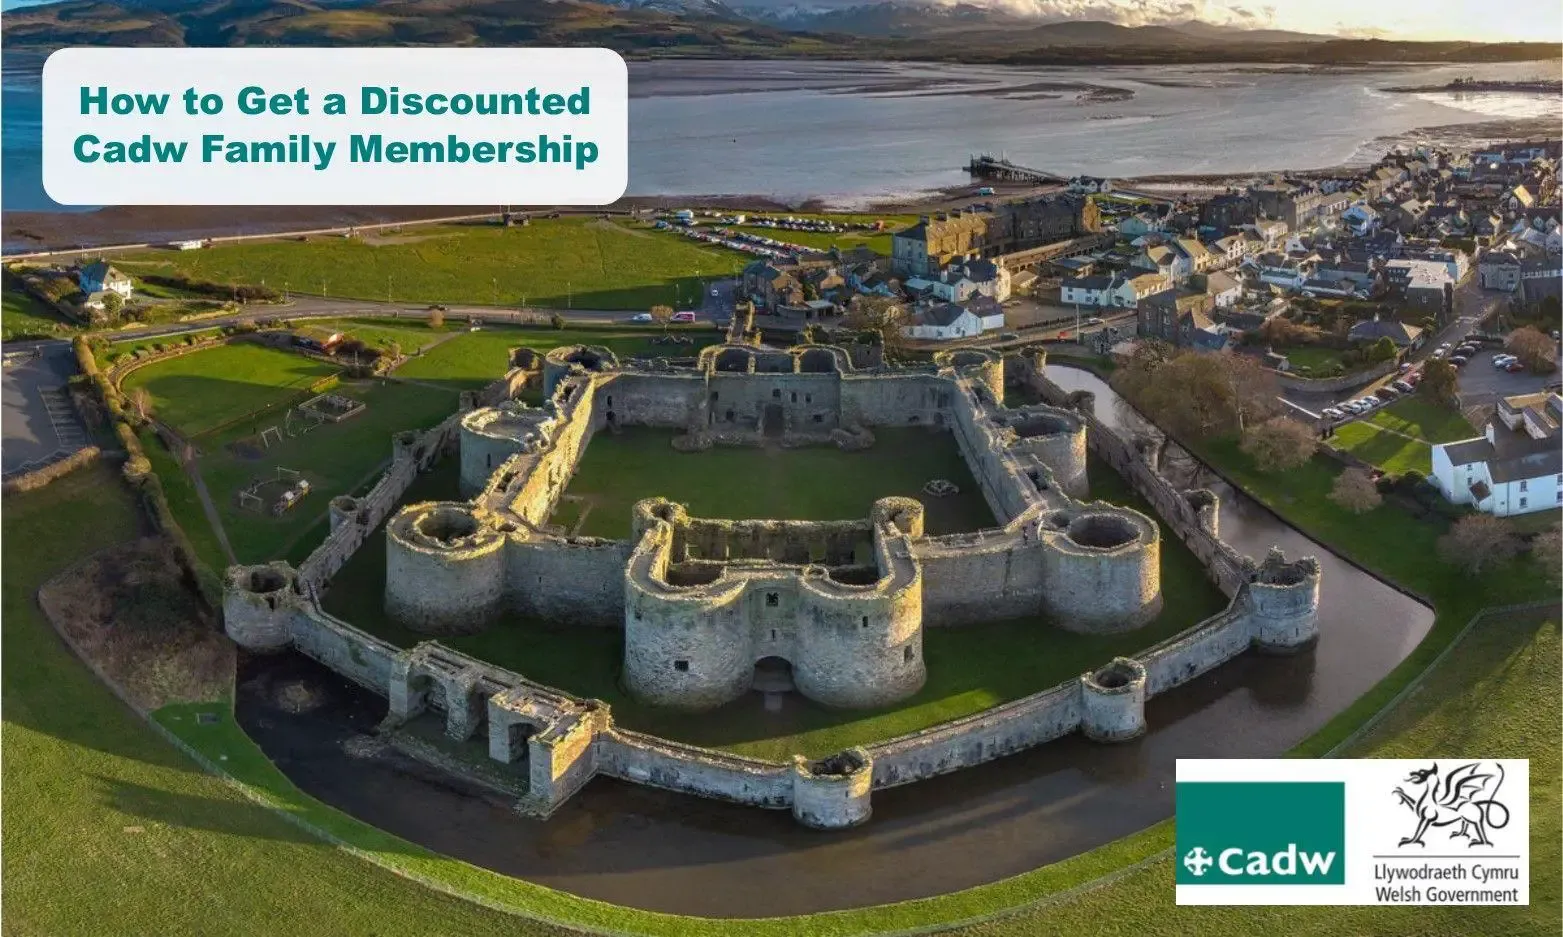 How to Get a Cadw Annual Family Membership from as little as £13.50